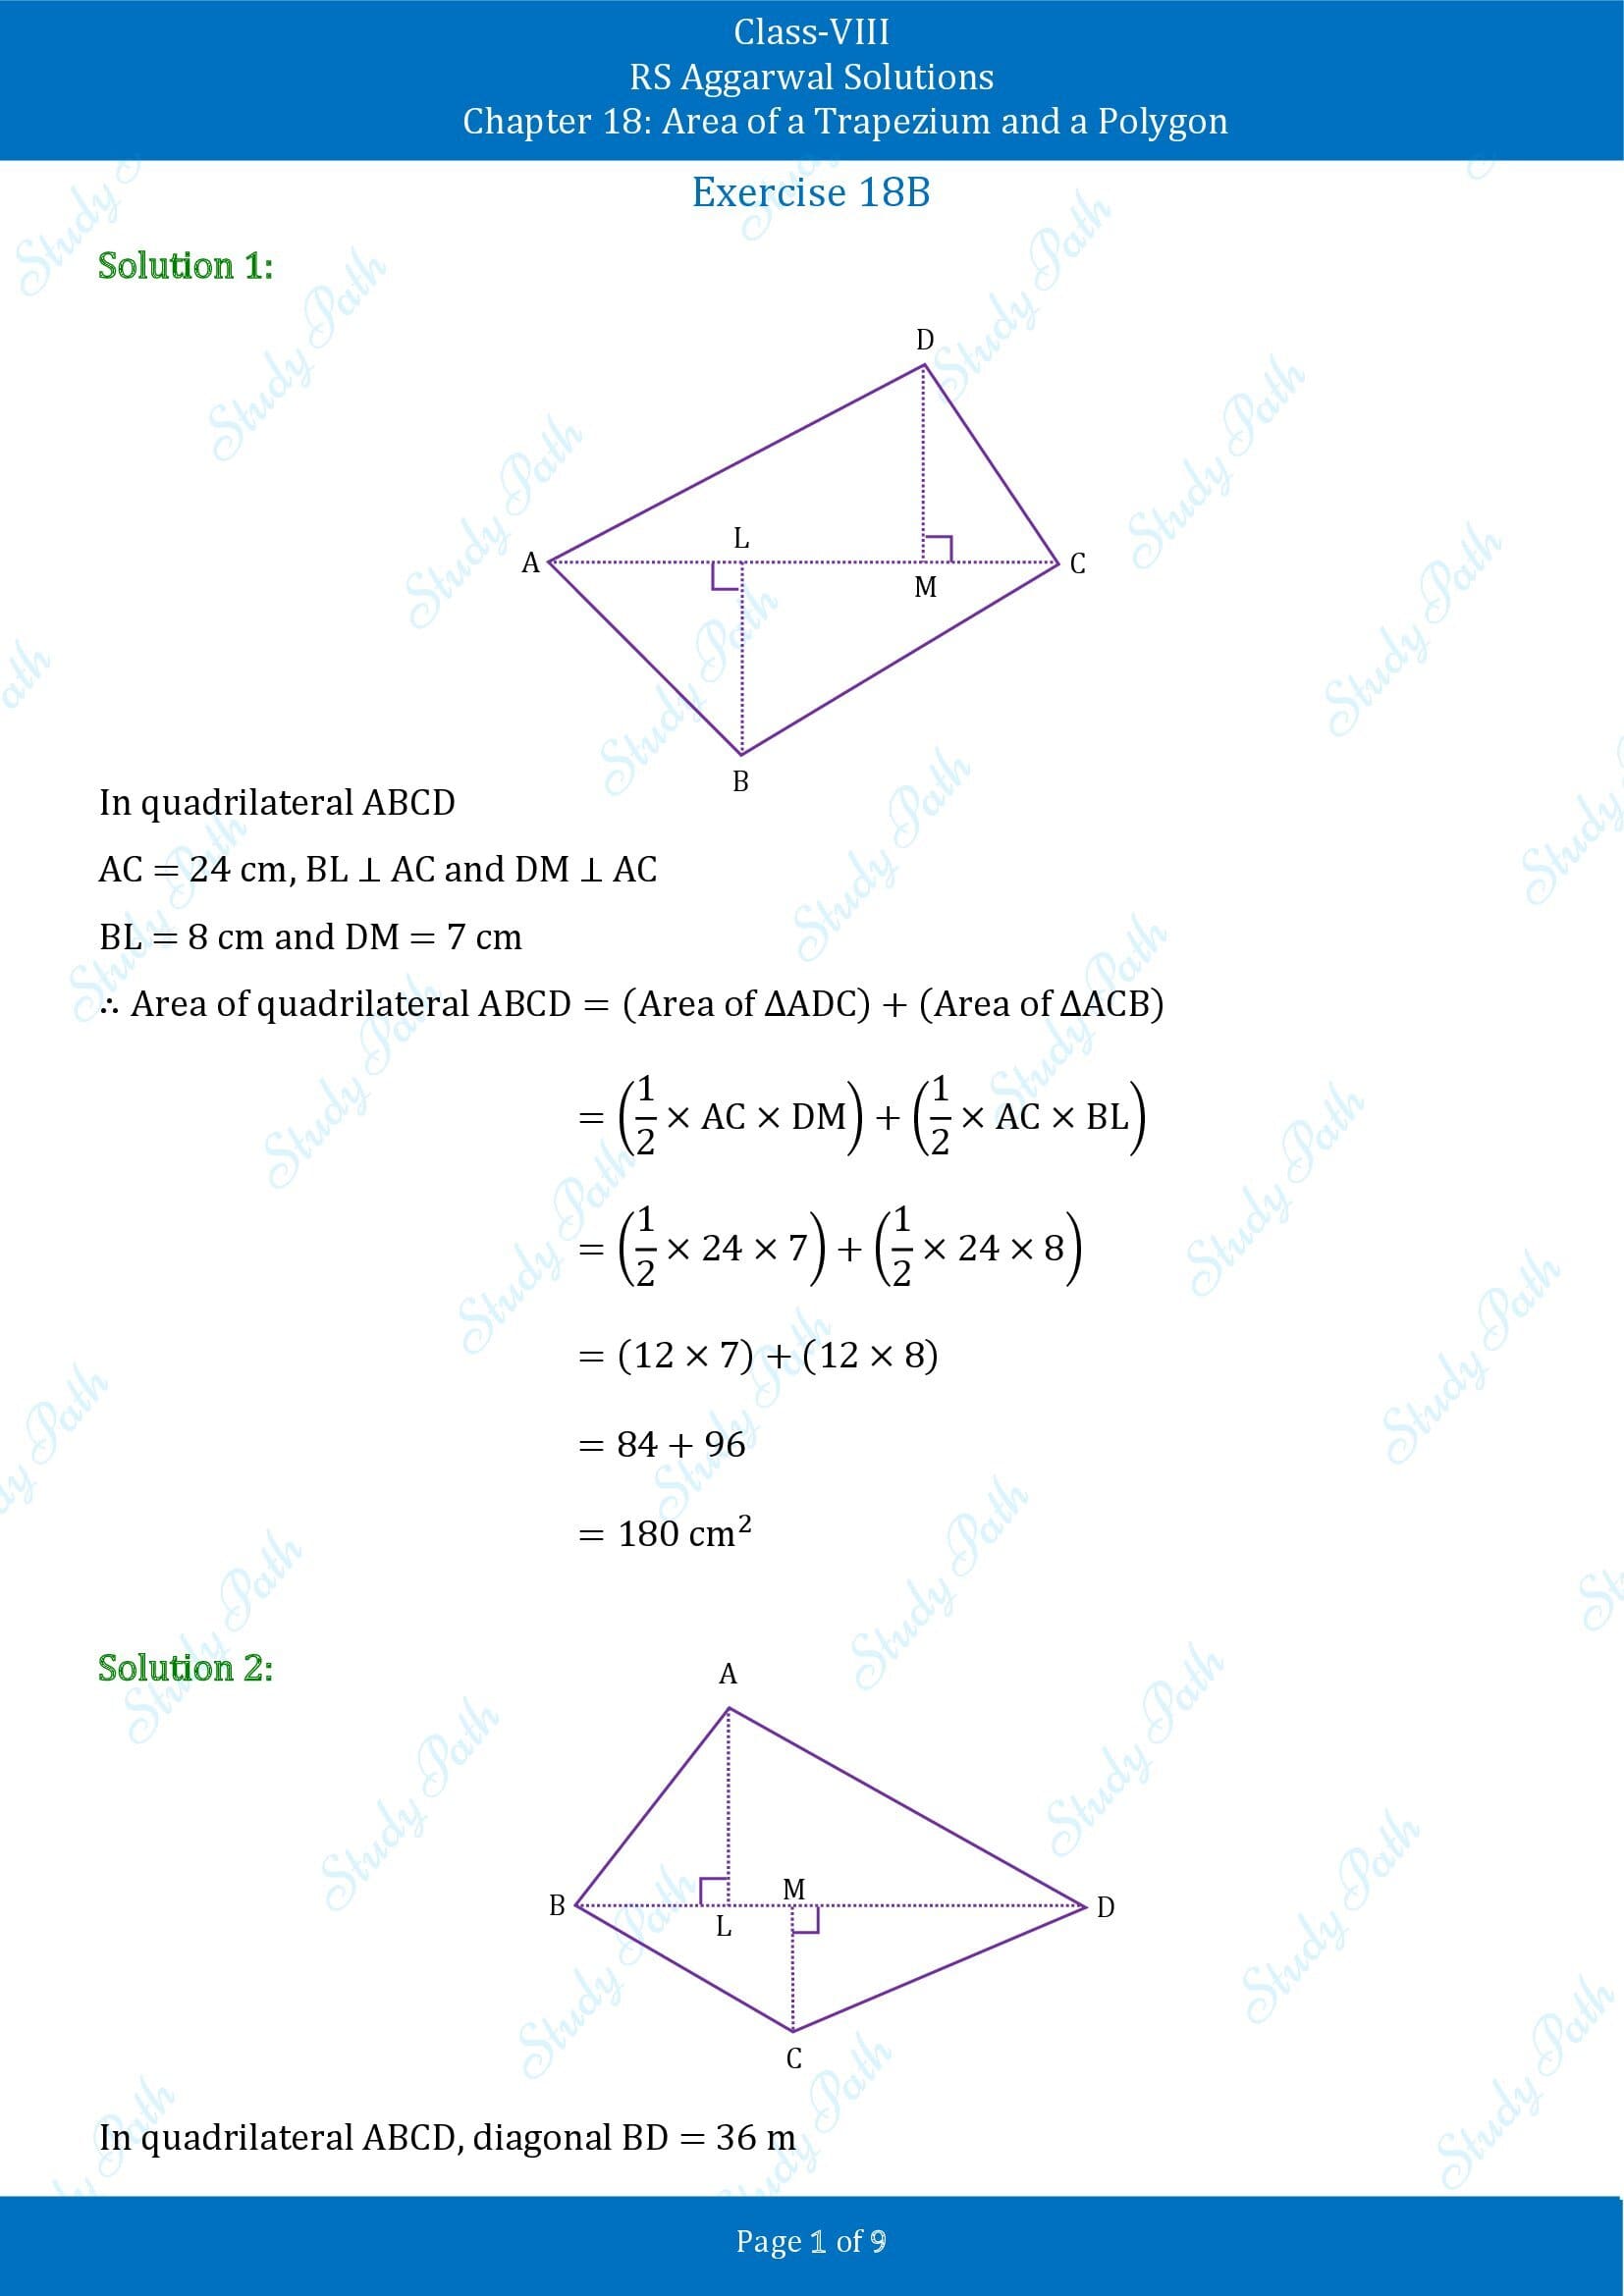 RS Aggarwal Solutions Class 8 Chapter 18 Area of a Trapezium and a Polygon Exercise 18B 00001